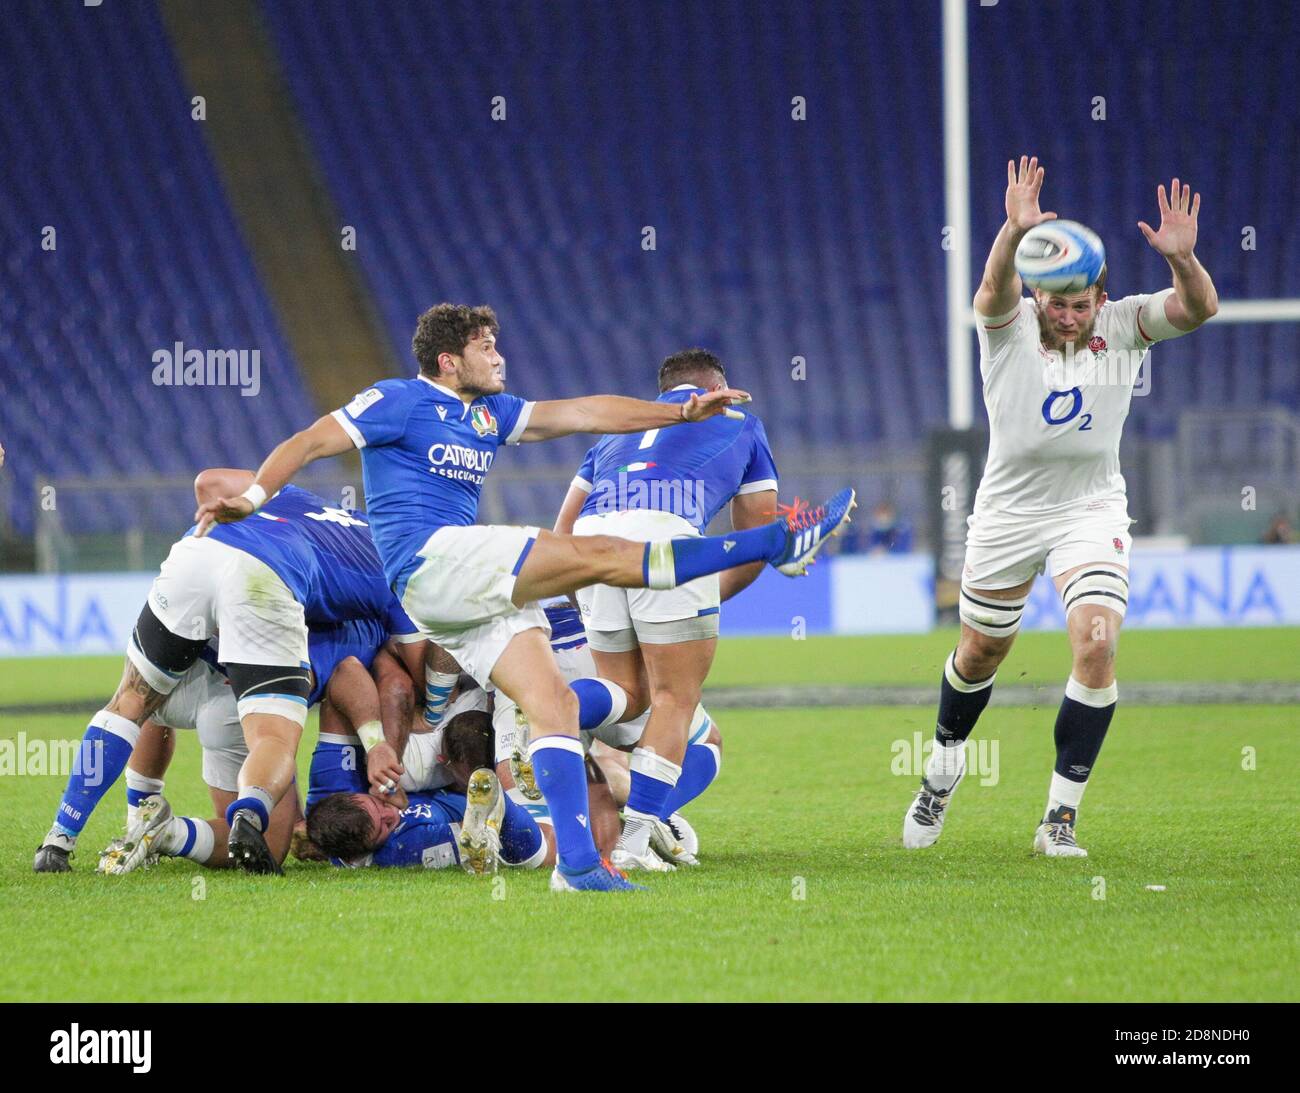 Rome, Italy. 31st Oct, 2020. rome, Italy, Stadio Olimpico, 31 Oct 2020, Marcello Violi (Italy) during Italy vs England - Rugby Six Nations match - Credit: LM/Luigi Mariani Credit: Luigi Mariani/LPS/ZUMA Wire/Alamy Live News Stock Photo